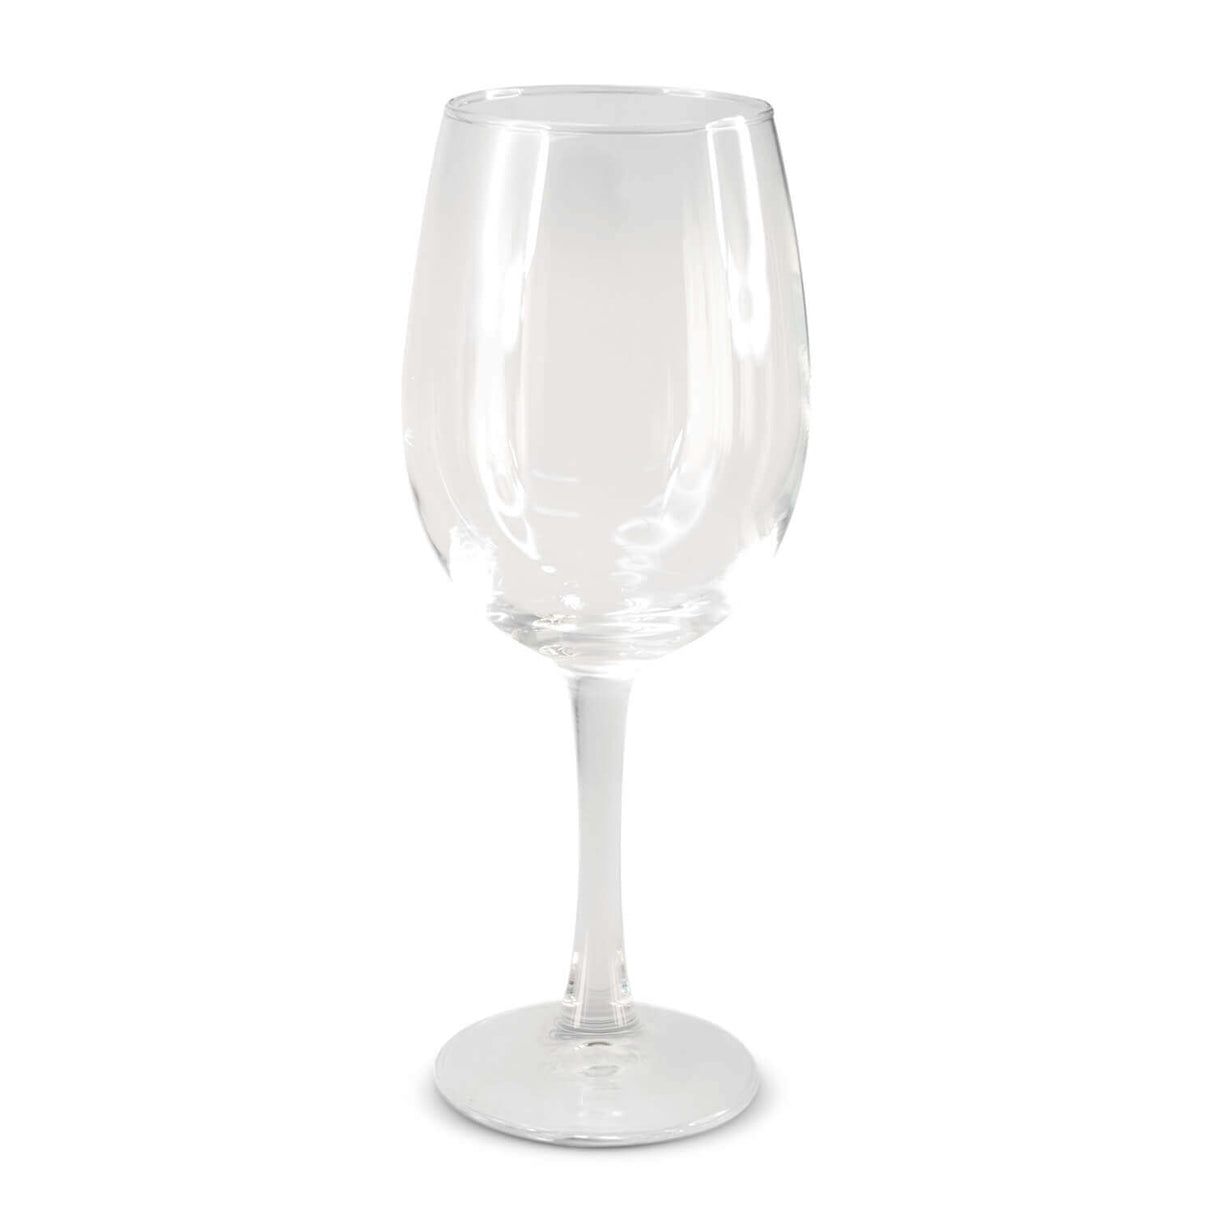 Wine Glass 350ml - Etched